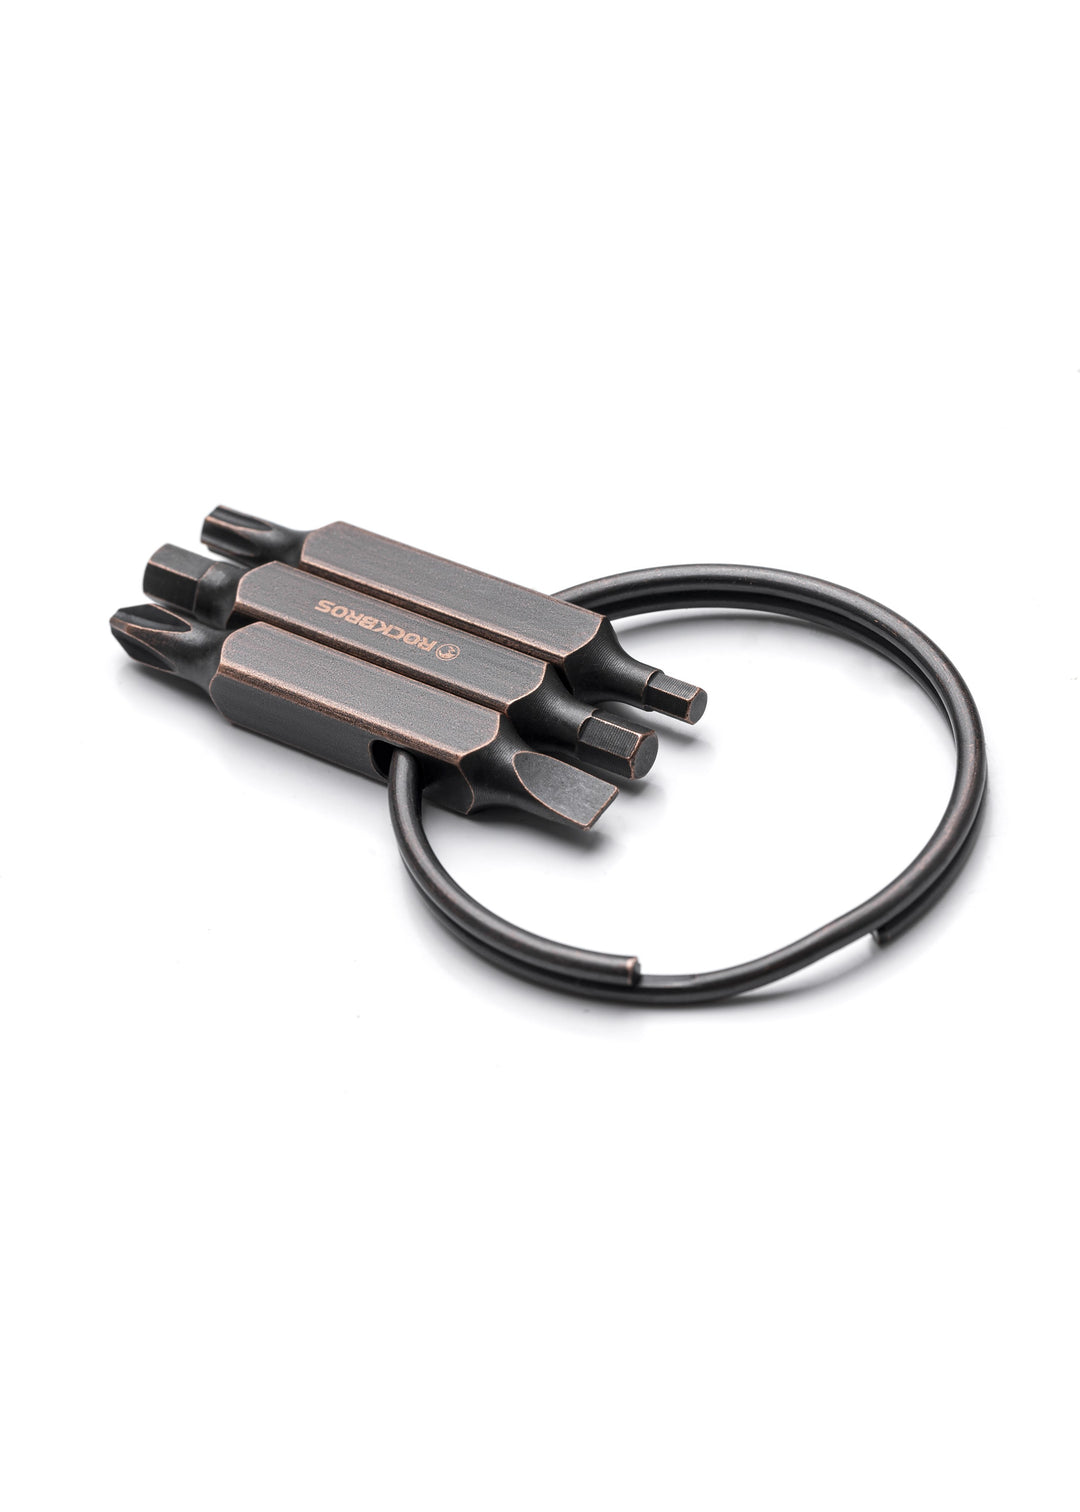 ROAD TO SKY Key Ring